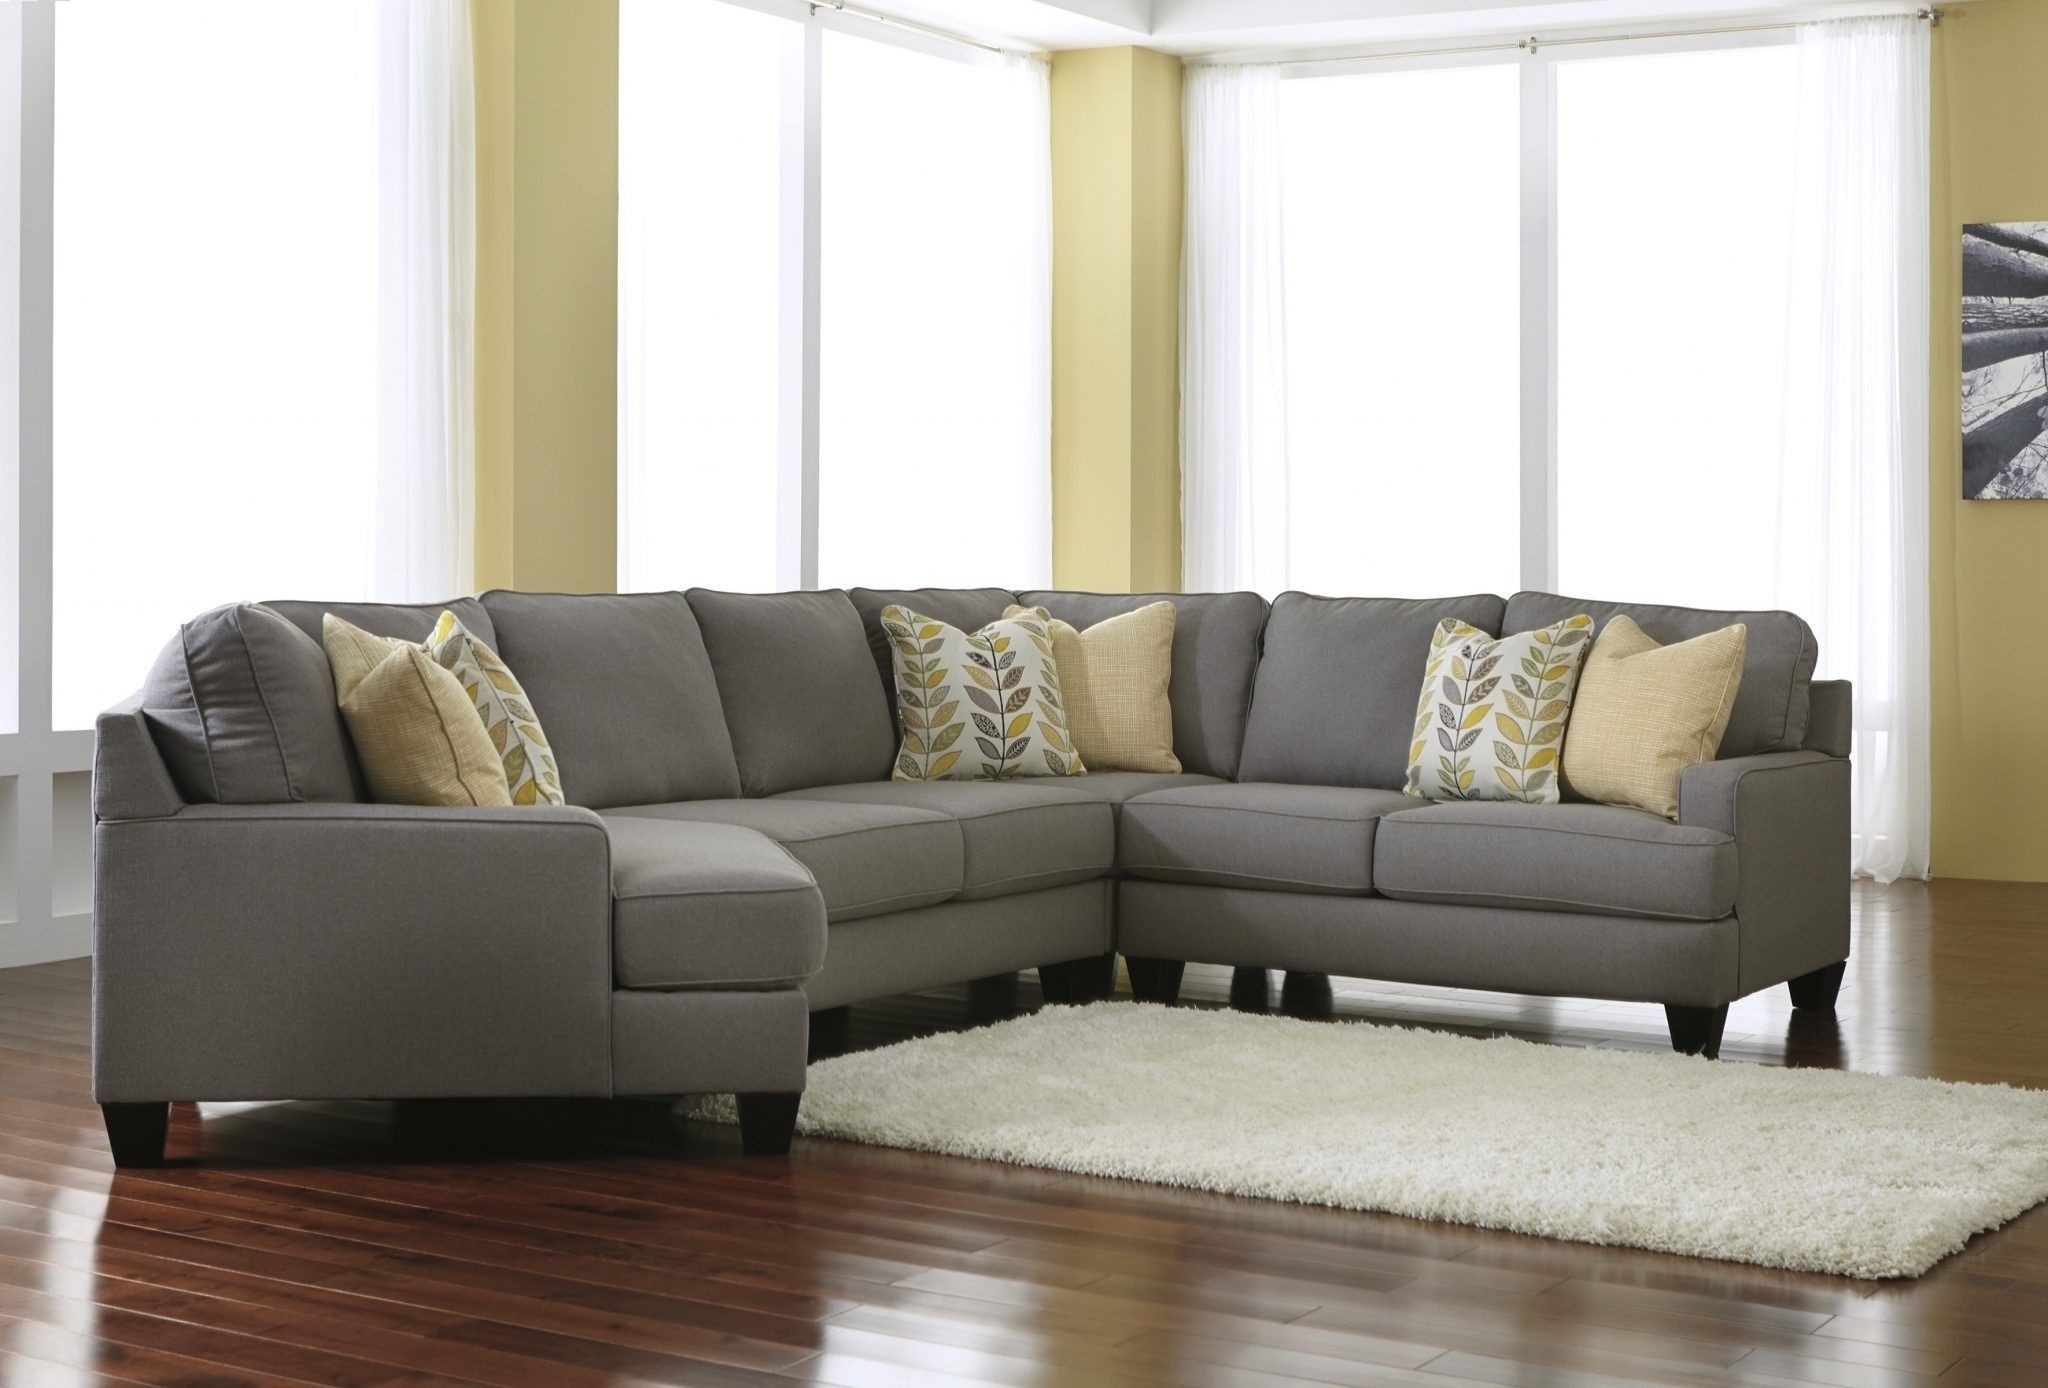 Preferred Best Furniture Mentor Oh: Furniture Store – Ashley Furniture Inside Ventura County Sectional Sofas (View 2 of 15)